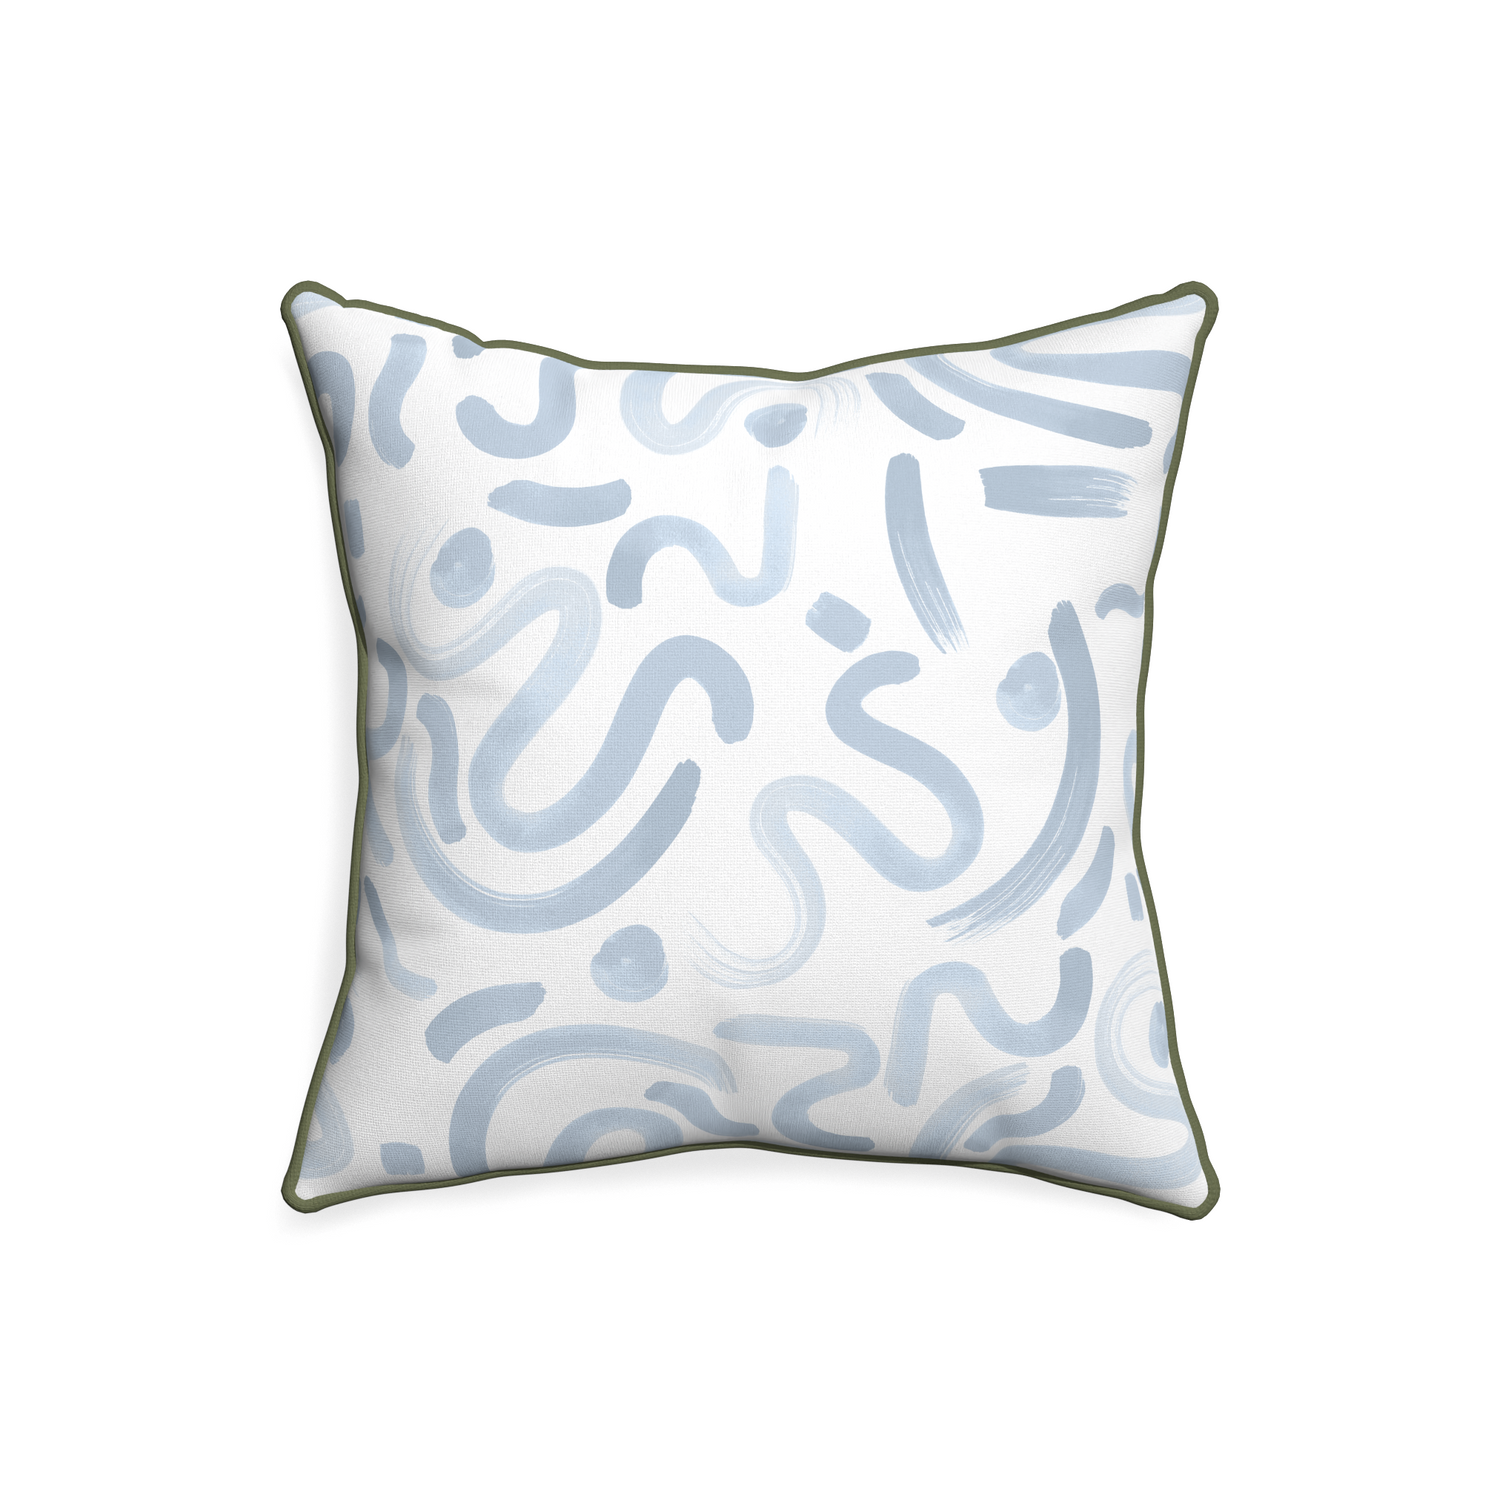 20-square hockney sky custom pillow with f piping on white background